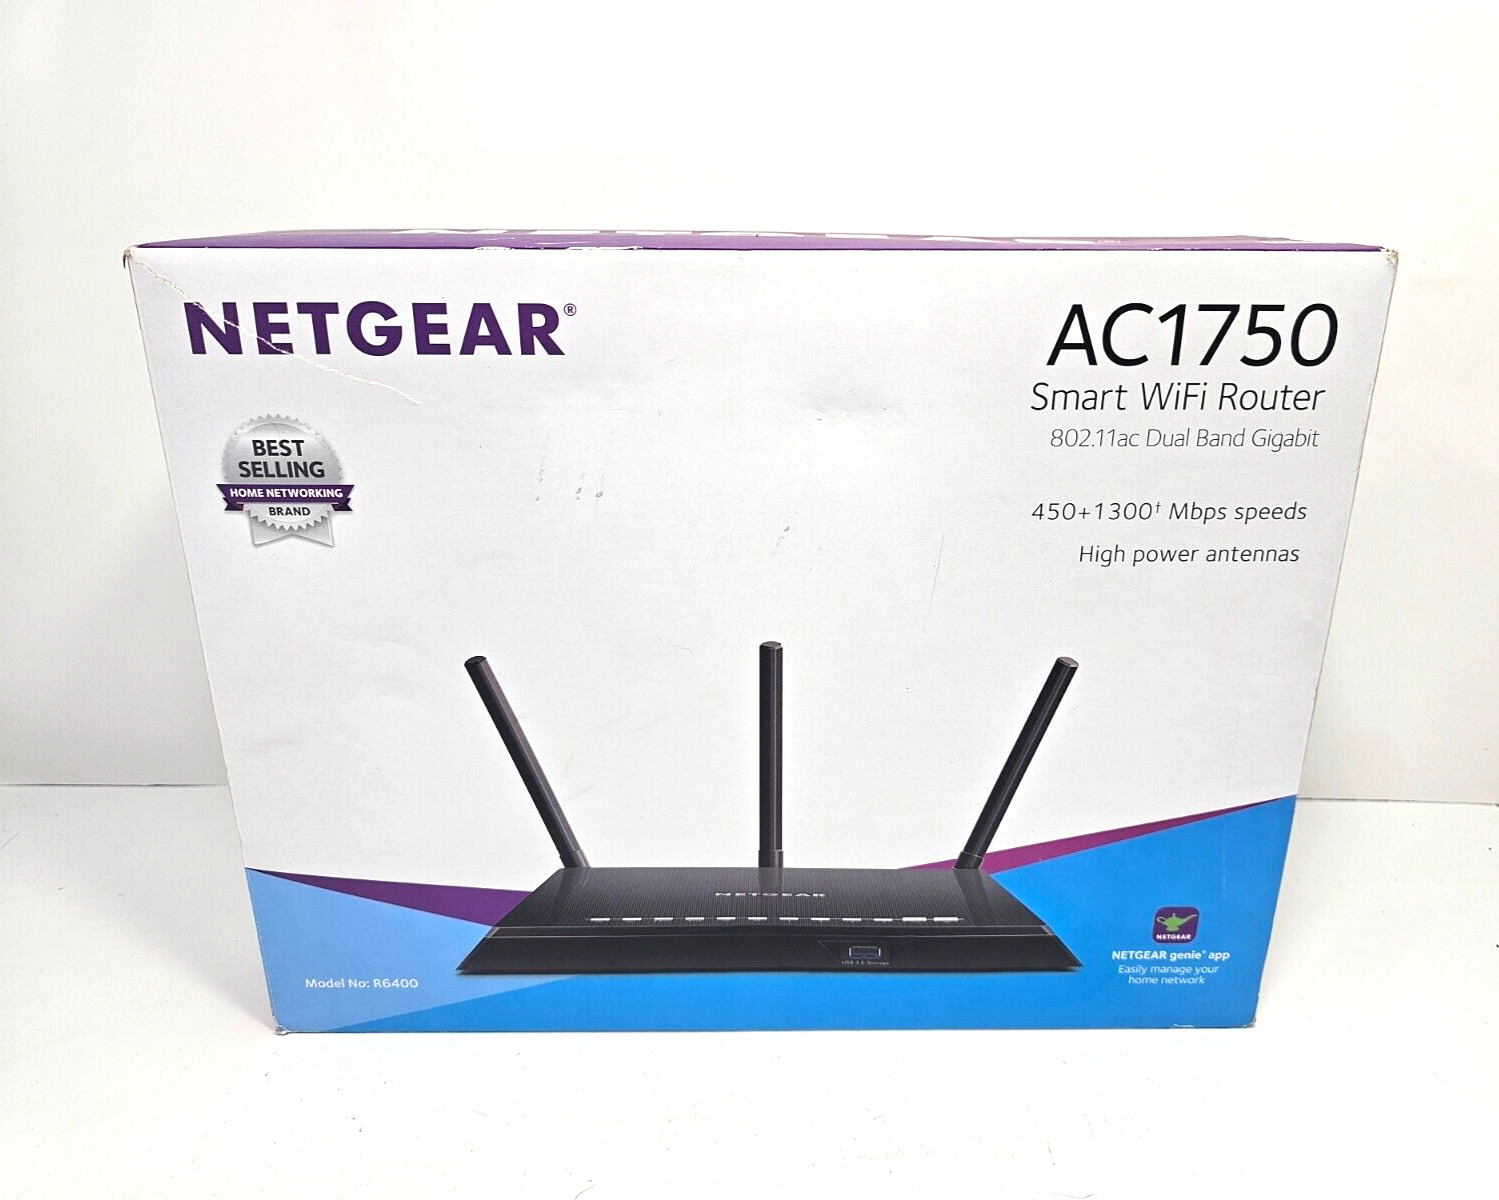 NETGEAR AC1750 Dual Band Smart WiFi Router 1300 Mbps Model R6400 BRAND NEW